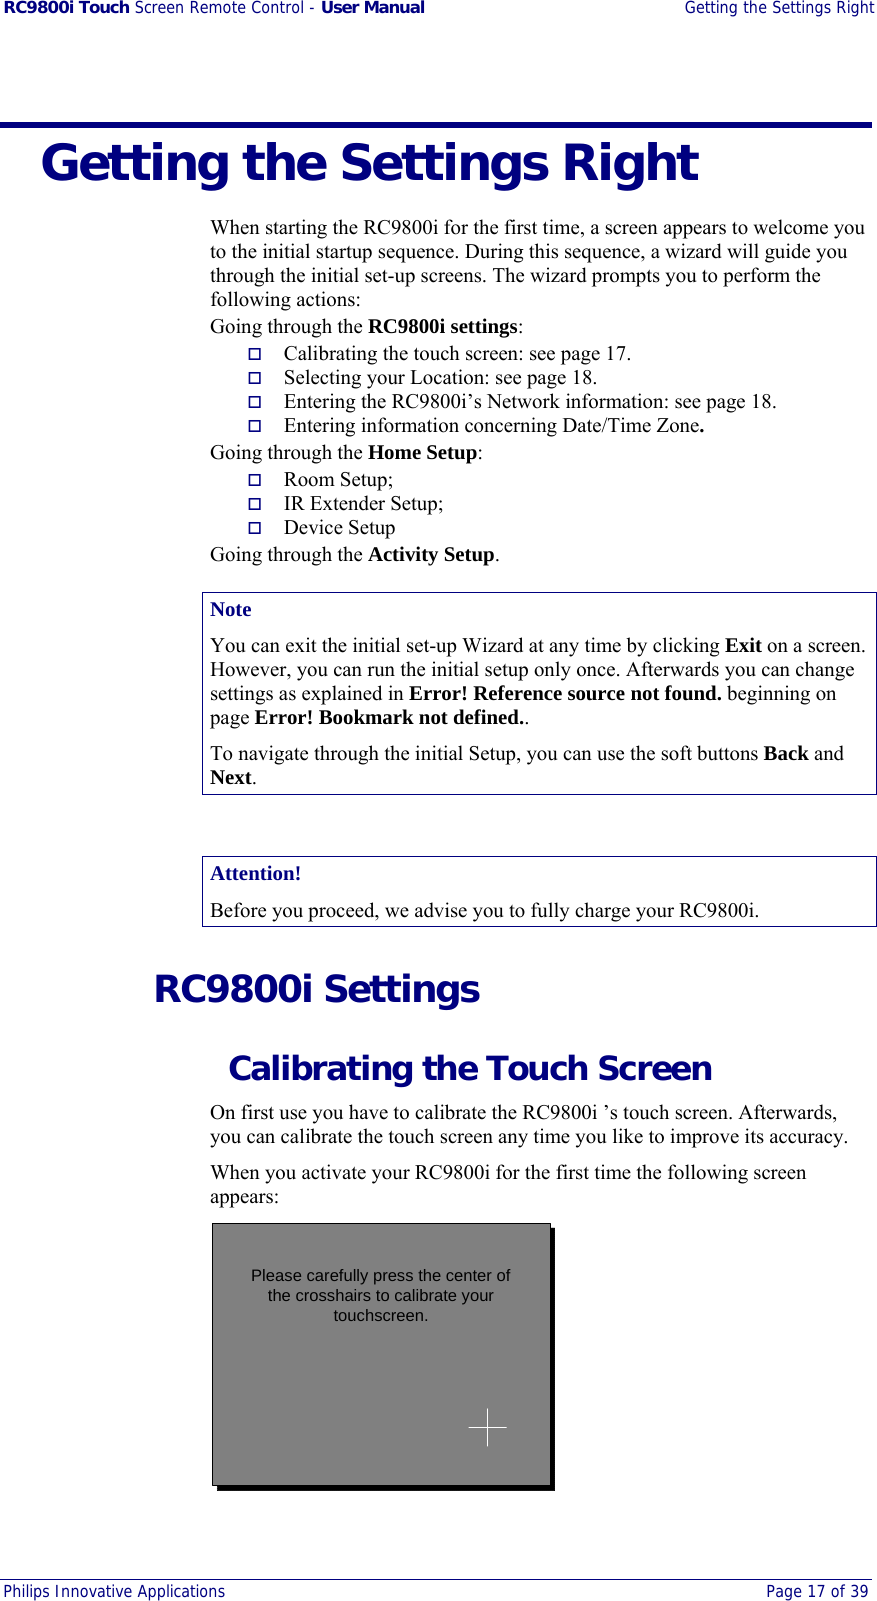 RC9800i Touch Screen Remote Control - User Manual  Getting the Settings Right Philips Innovative Applications  Page 17 of 39    Getting the Settings Right When starting the RC9800i for the first time, a screen appears to welcome you to the initial startup sequence. During this sequence, a wizard will guide you through the initial set-up screens. The wizard prompts you to perform the following actions: Going through the RC9800i settings:   Calibrating the touch screen: see page 17.   Selecting your Location: see page 18.   Entering the RC9800i’s Network information: see page 18.   Entering information concerning Date/Time Zone. Going through the Home Setup:   Room Setup;   IR Extender Setup;   Device Setup Going through the Activity Setup. Note You can exit the initial set-up Wizard at any time by clicking Exit on a screen. However, you can run the initial setup only once. Afterwards you can change settings as explained in Error! Reference source not found. beginning on page Error! Bookmark not defined.. To navigate through the initial Setup, you can use the soft buttons Back and Next.  Attention! Before you proceed, we advise you to fully charge your RC9800i.  RC9800i Settings   Calibrating the Touch Screen On first use you have to calibrate the RC9800i ’s touch screen. Afterwards, you can calibrate the touch screen any time you like to improve its accuracy. When you activate your RC9800i for the first time the following screen appears: Please carefully press the center ofthe crosshairs to calibrate yourtouchscreen. 